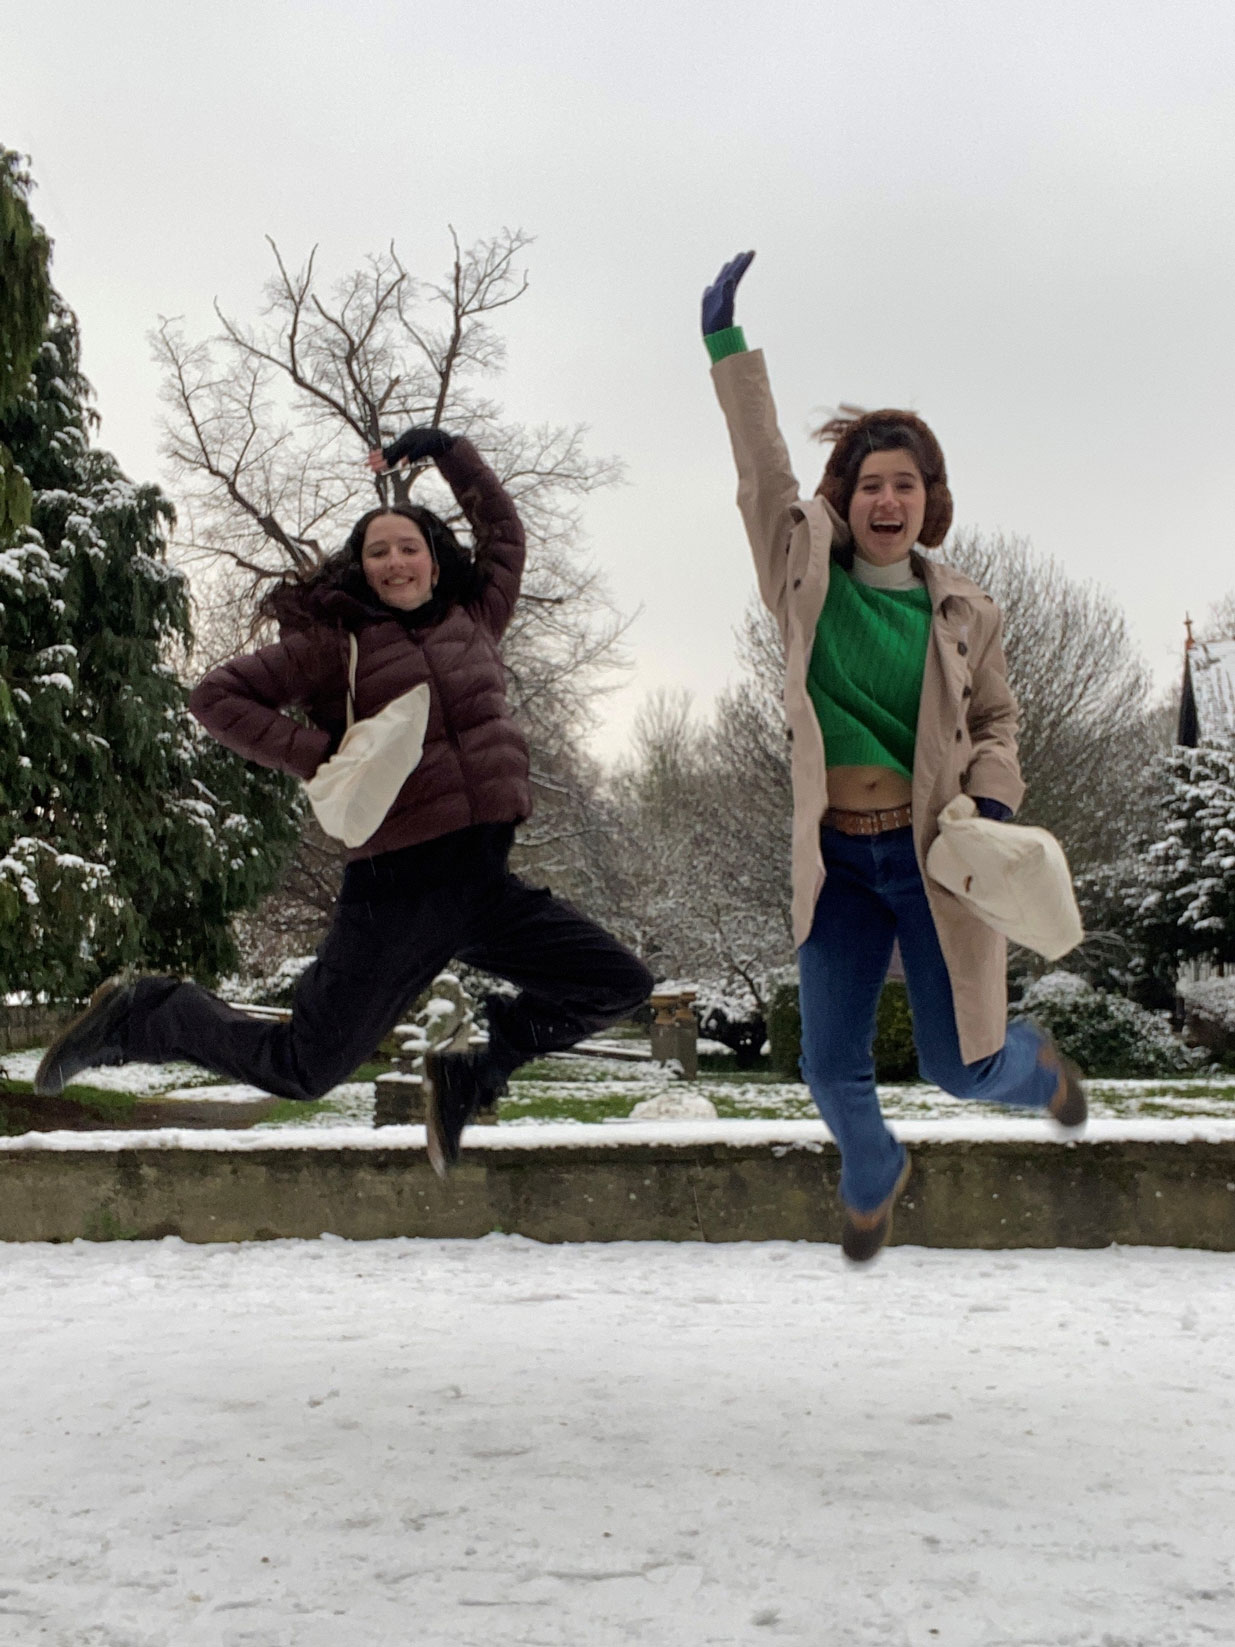 Students jumping in the snow at Roehampton